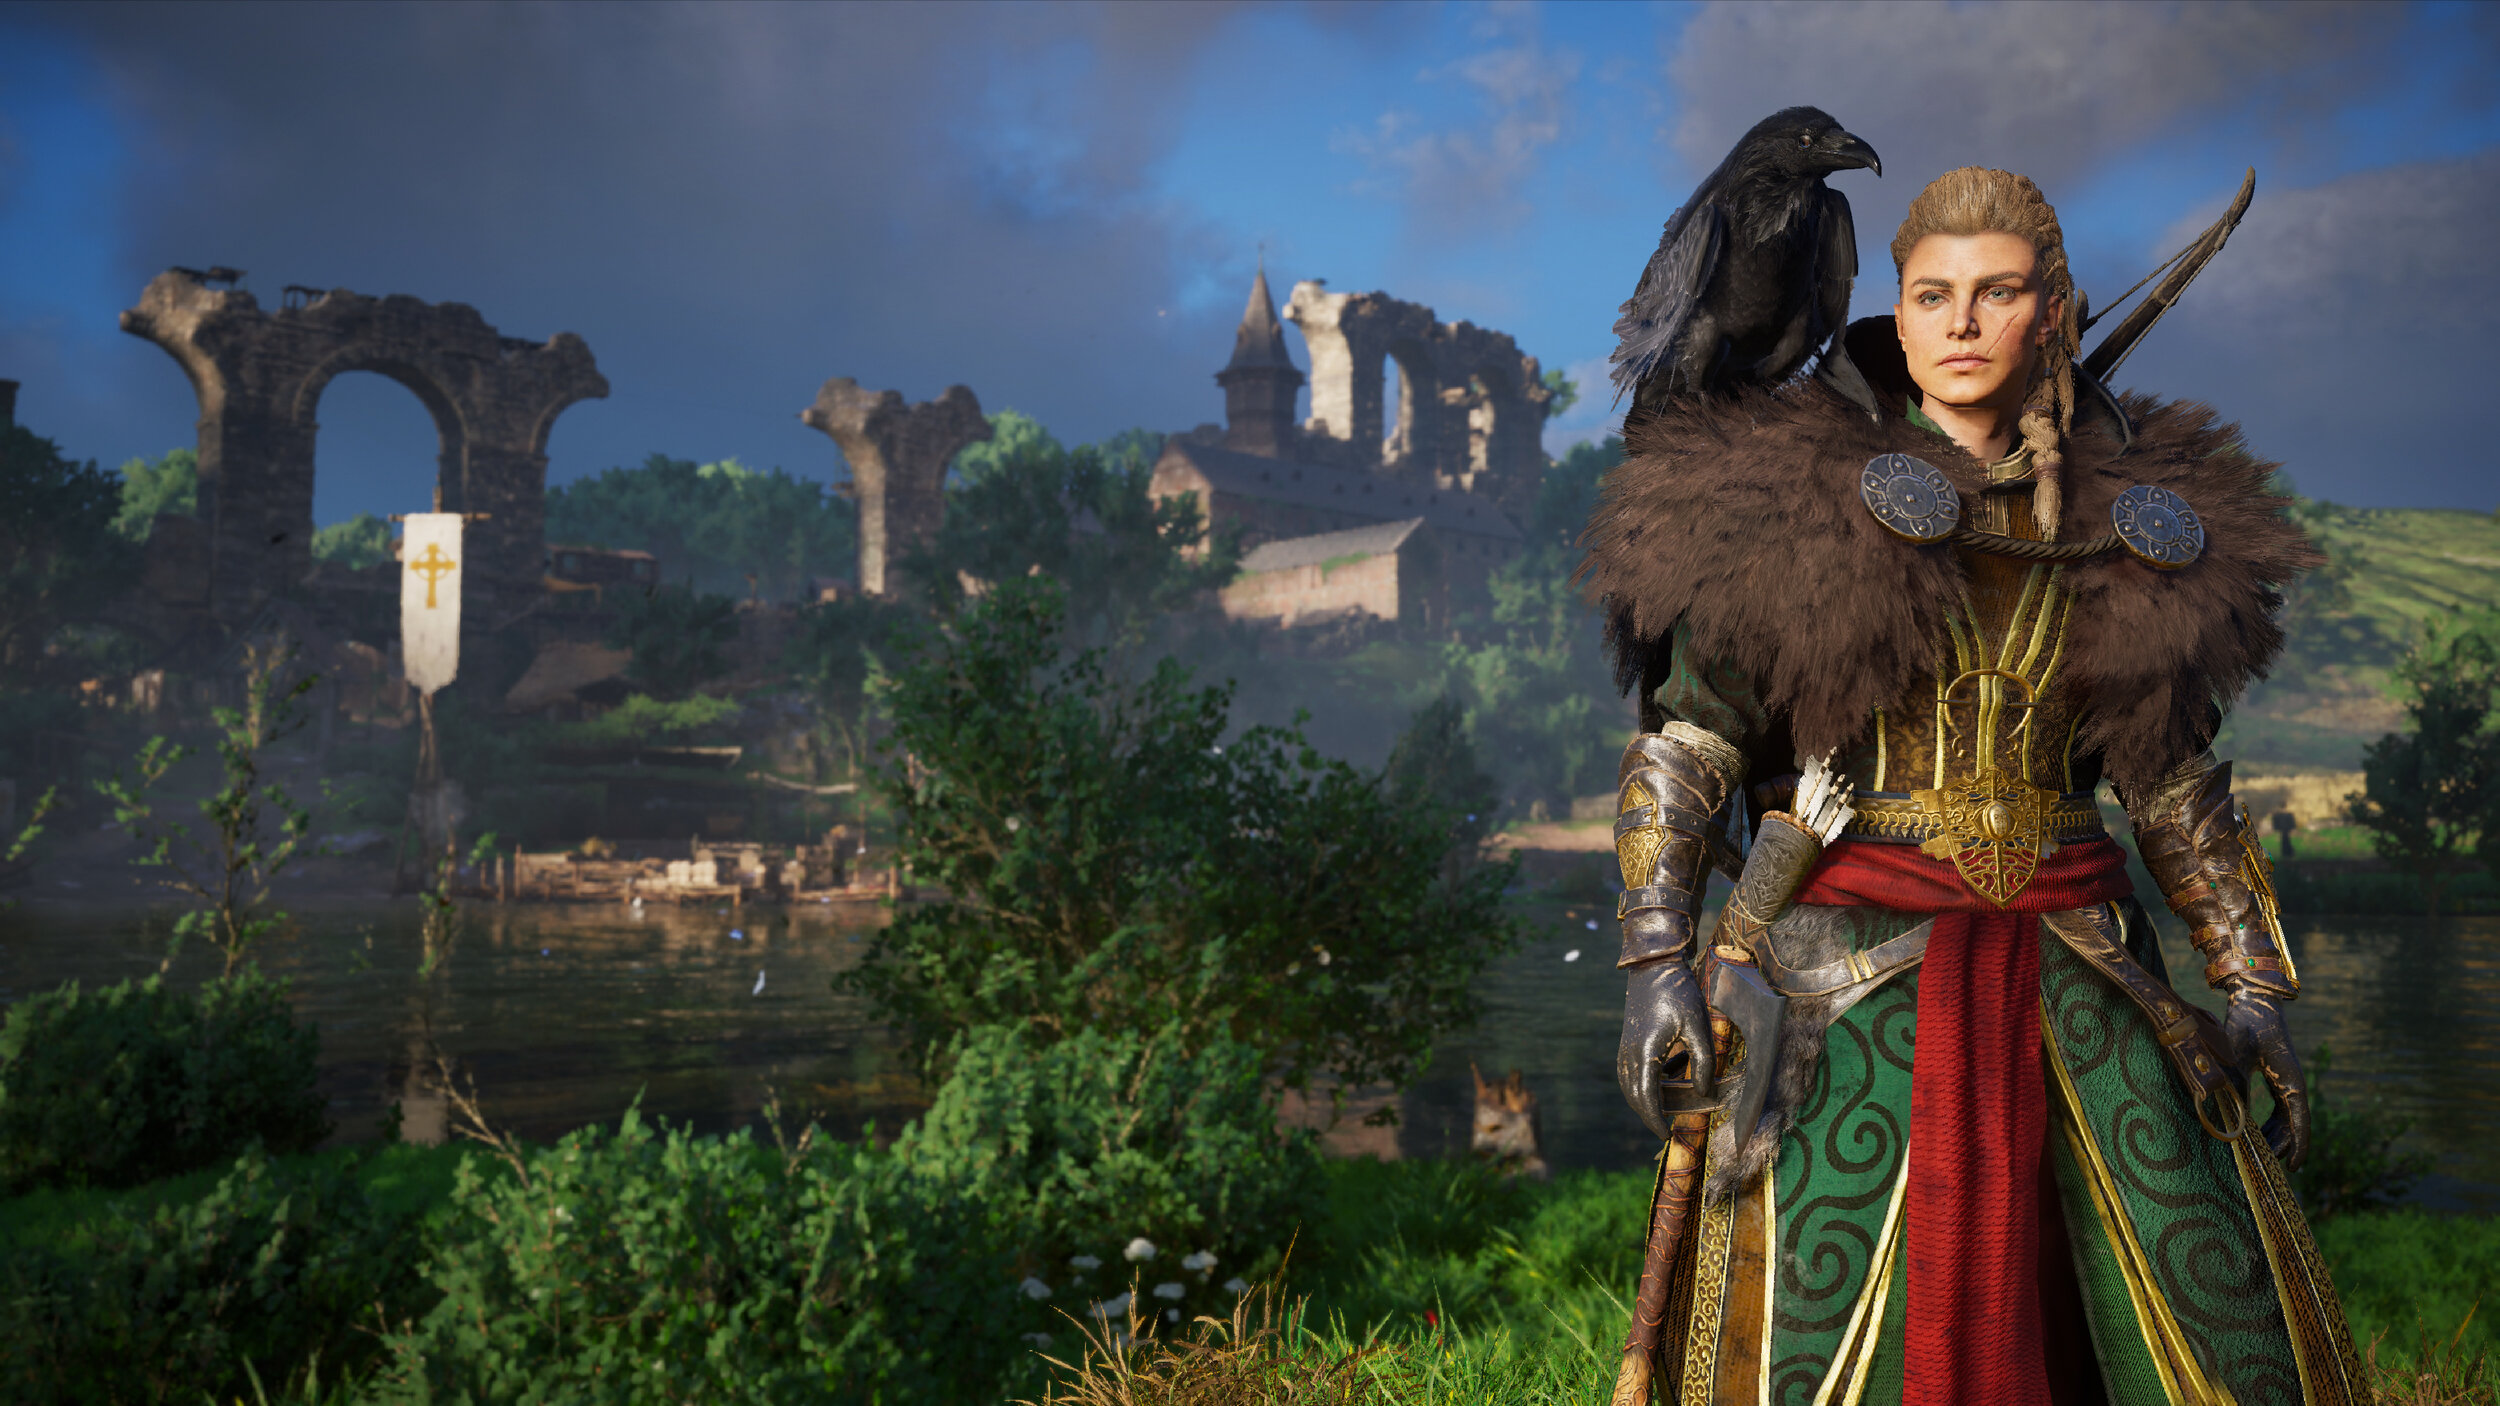 This Assassin's Creed Valhalla Mod Allows You to Customize Eivor